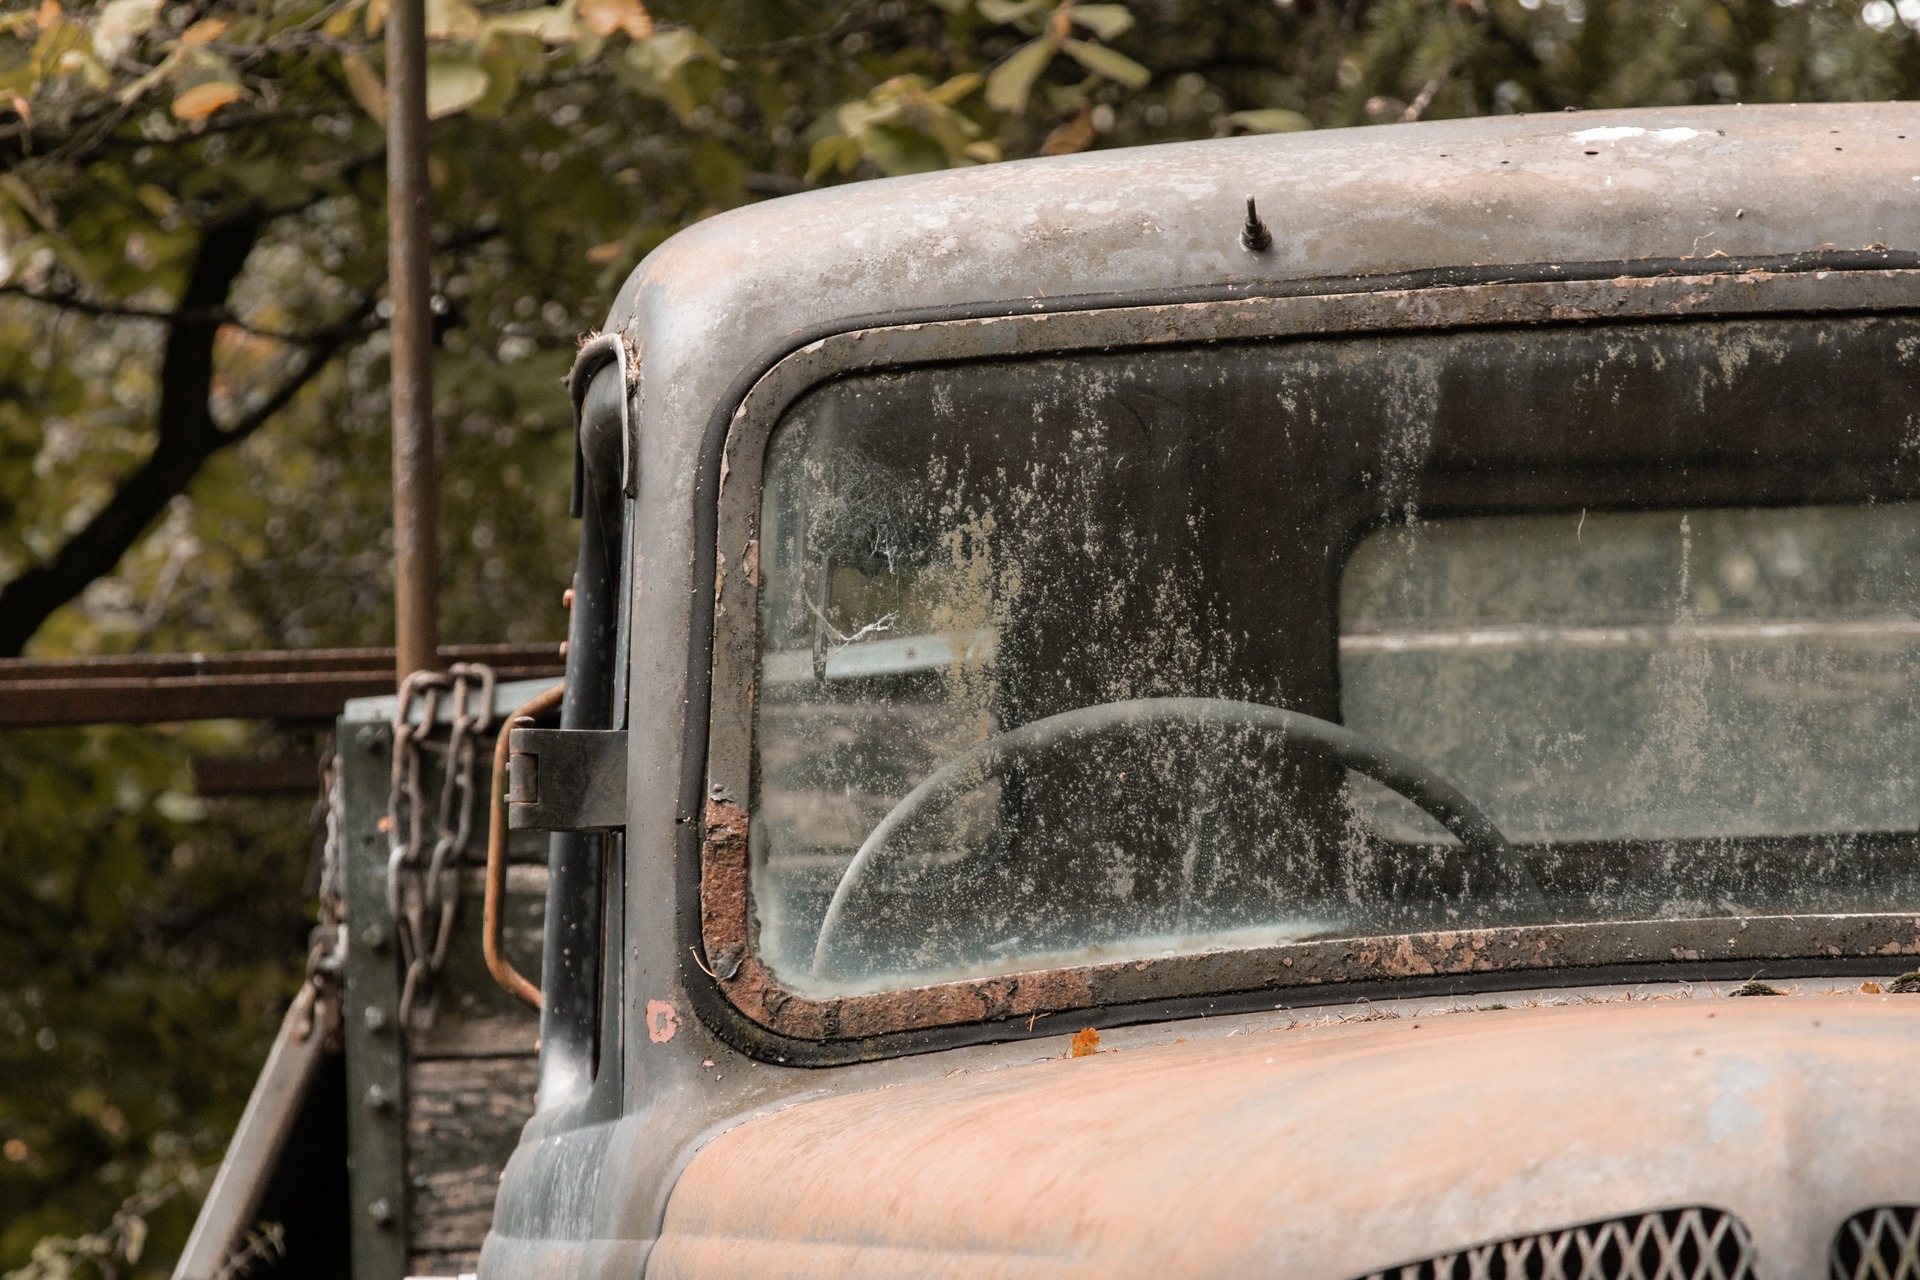 An old truck covered in mold and rust